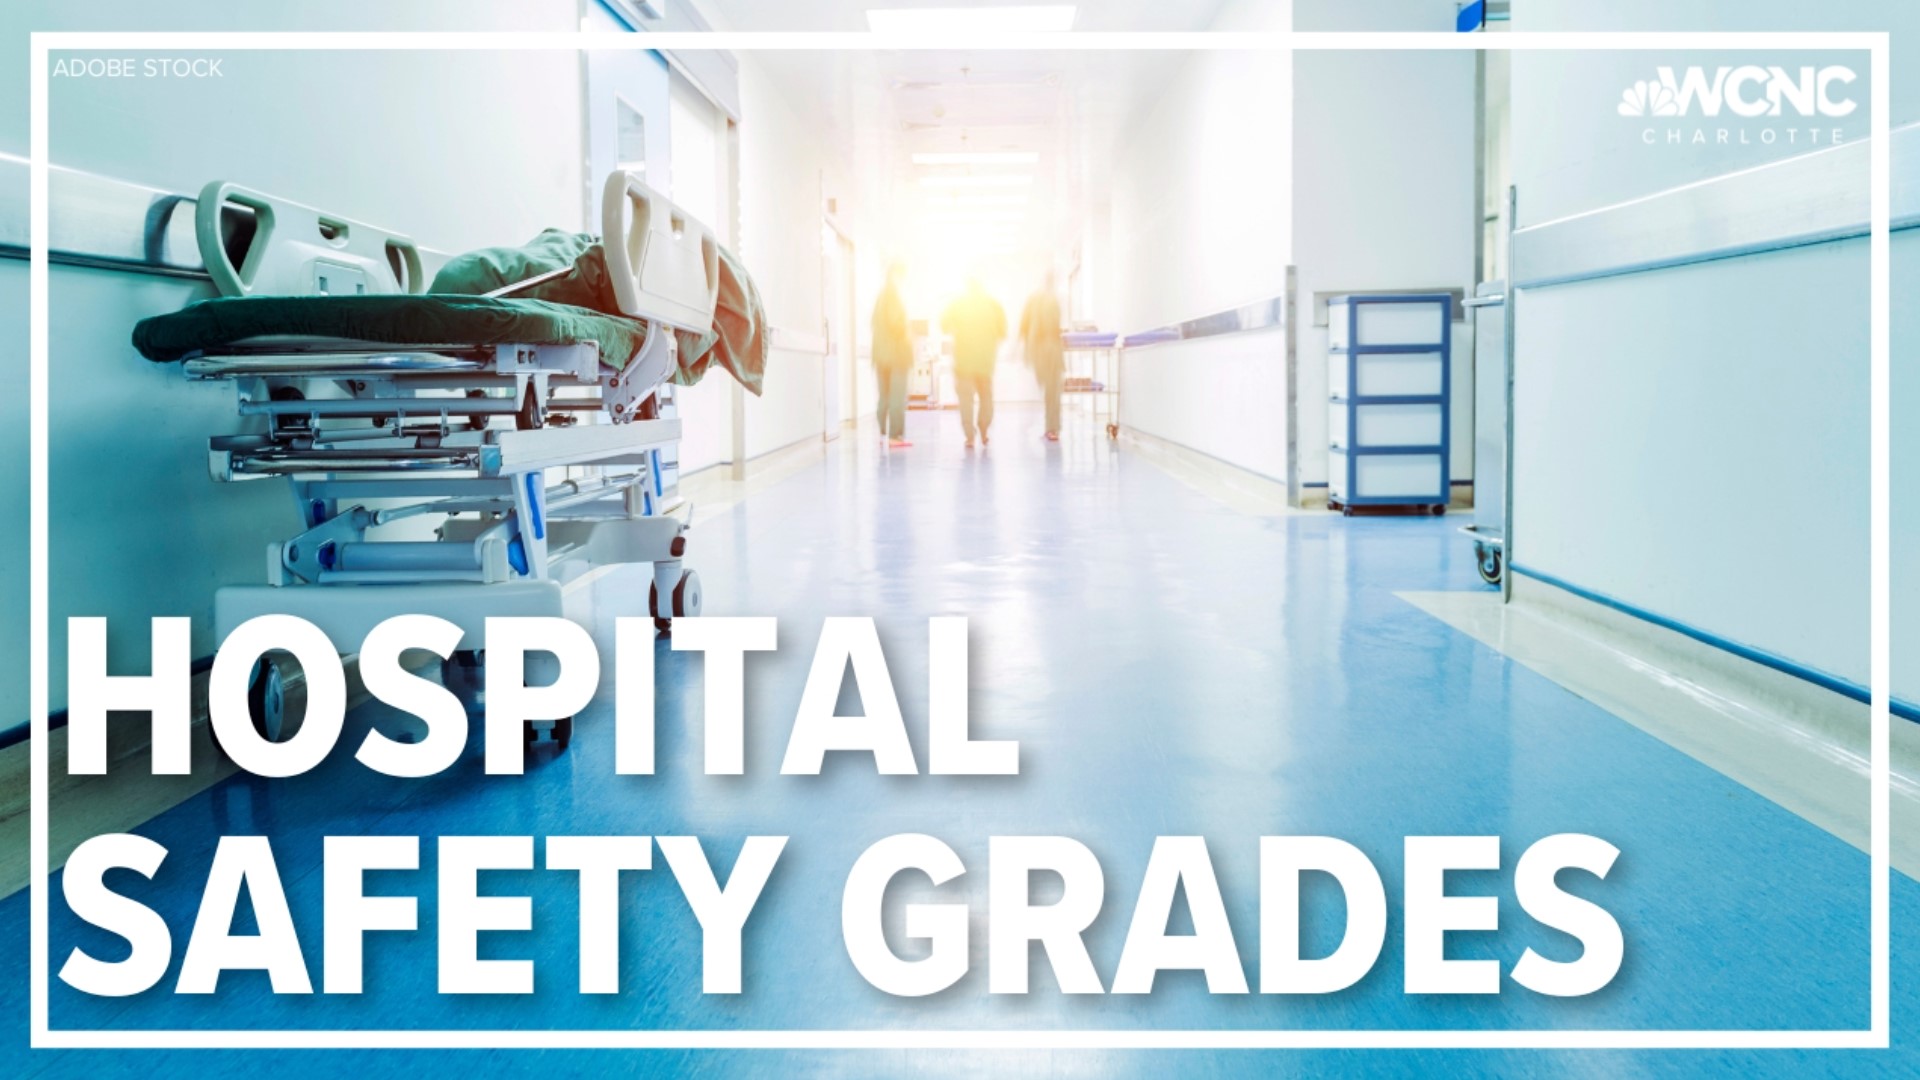 The ratings were released by The Leapfrog Group, a national nonprofit watchdog that advances patient safety in hospitals.